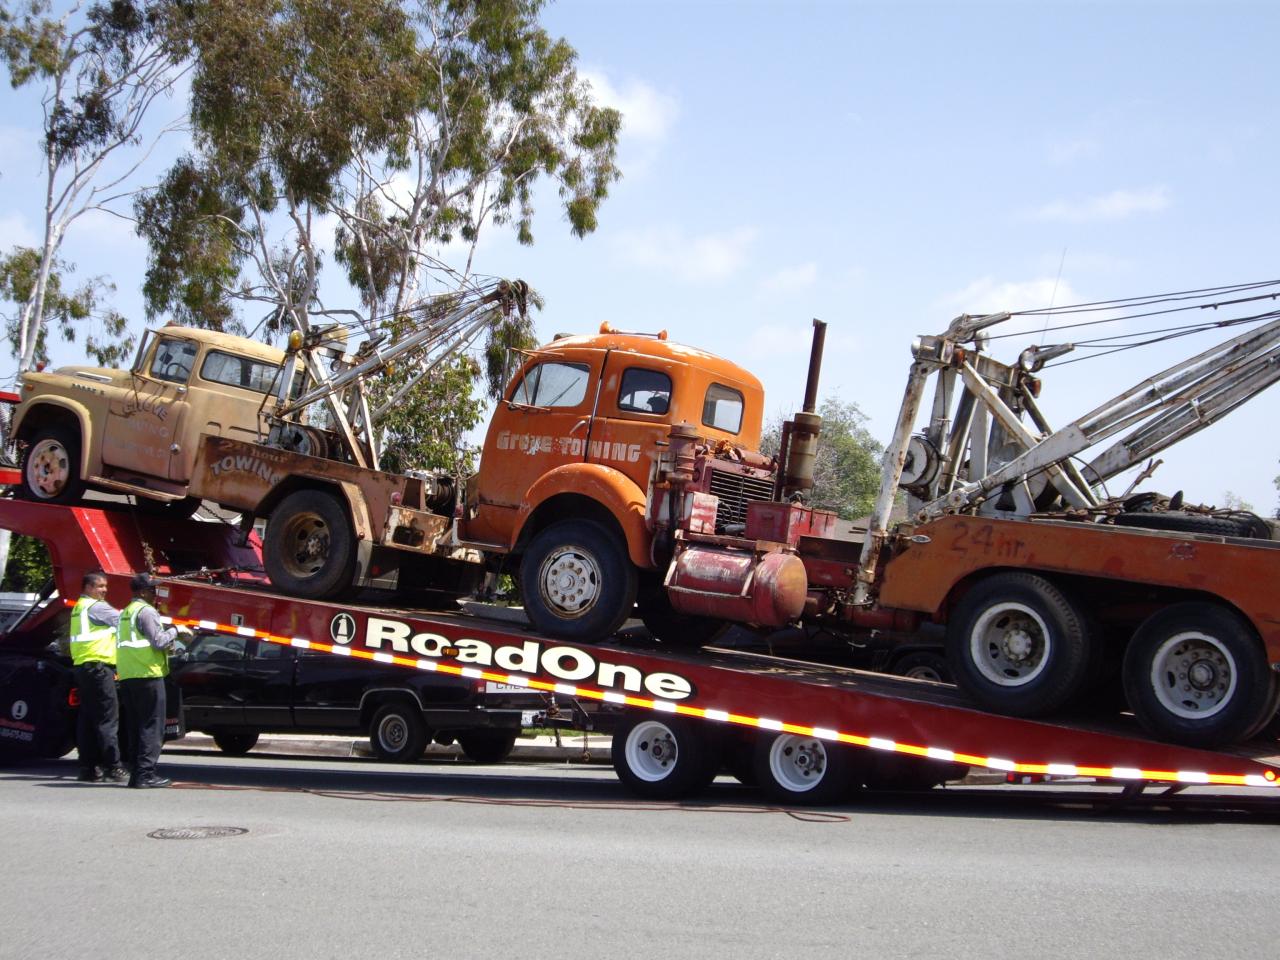 Our old tow trucks.